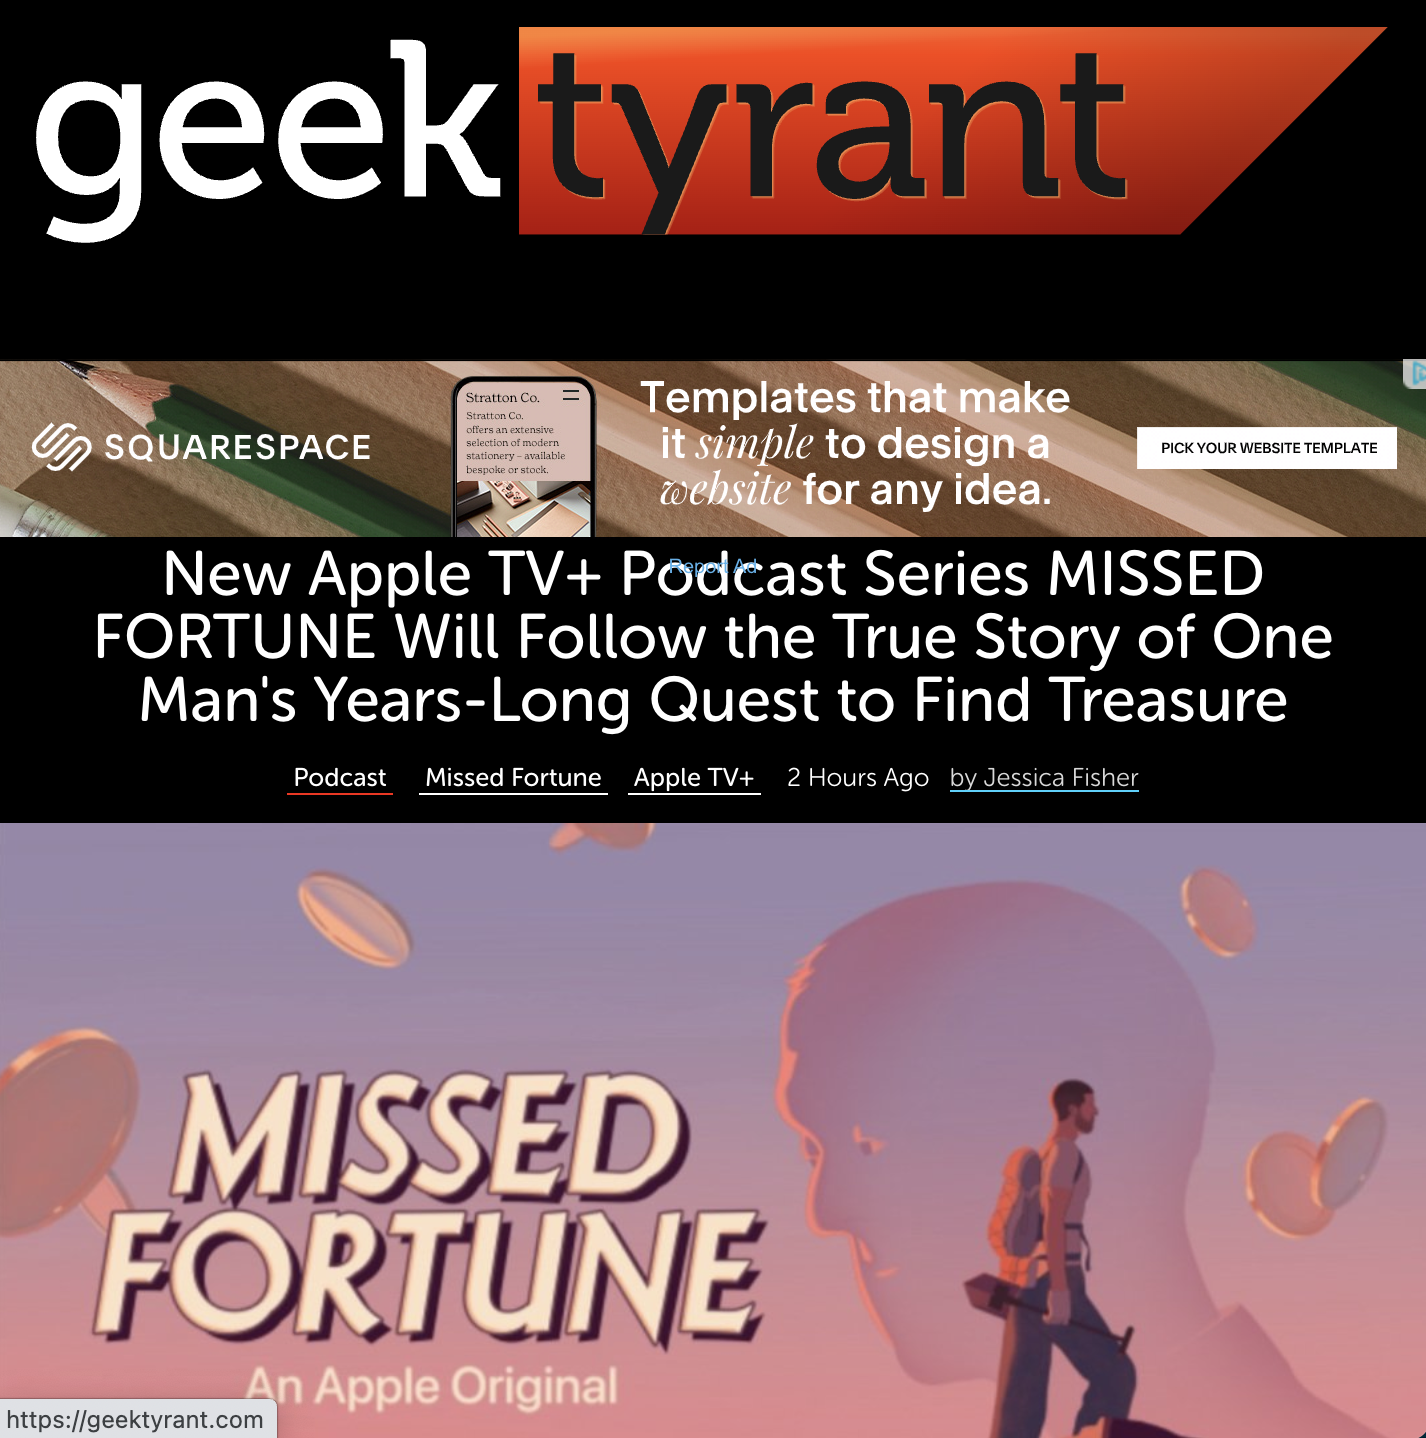 Geek Tyrant Missed Fortune Podcast